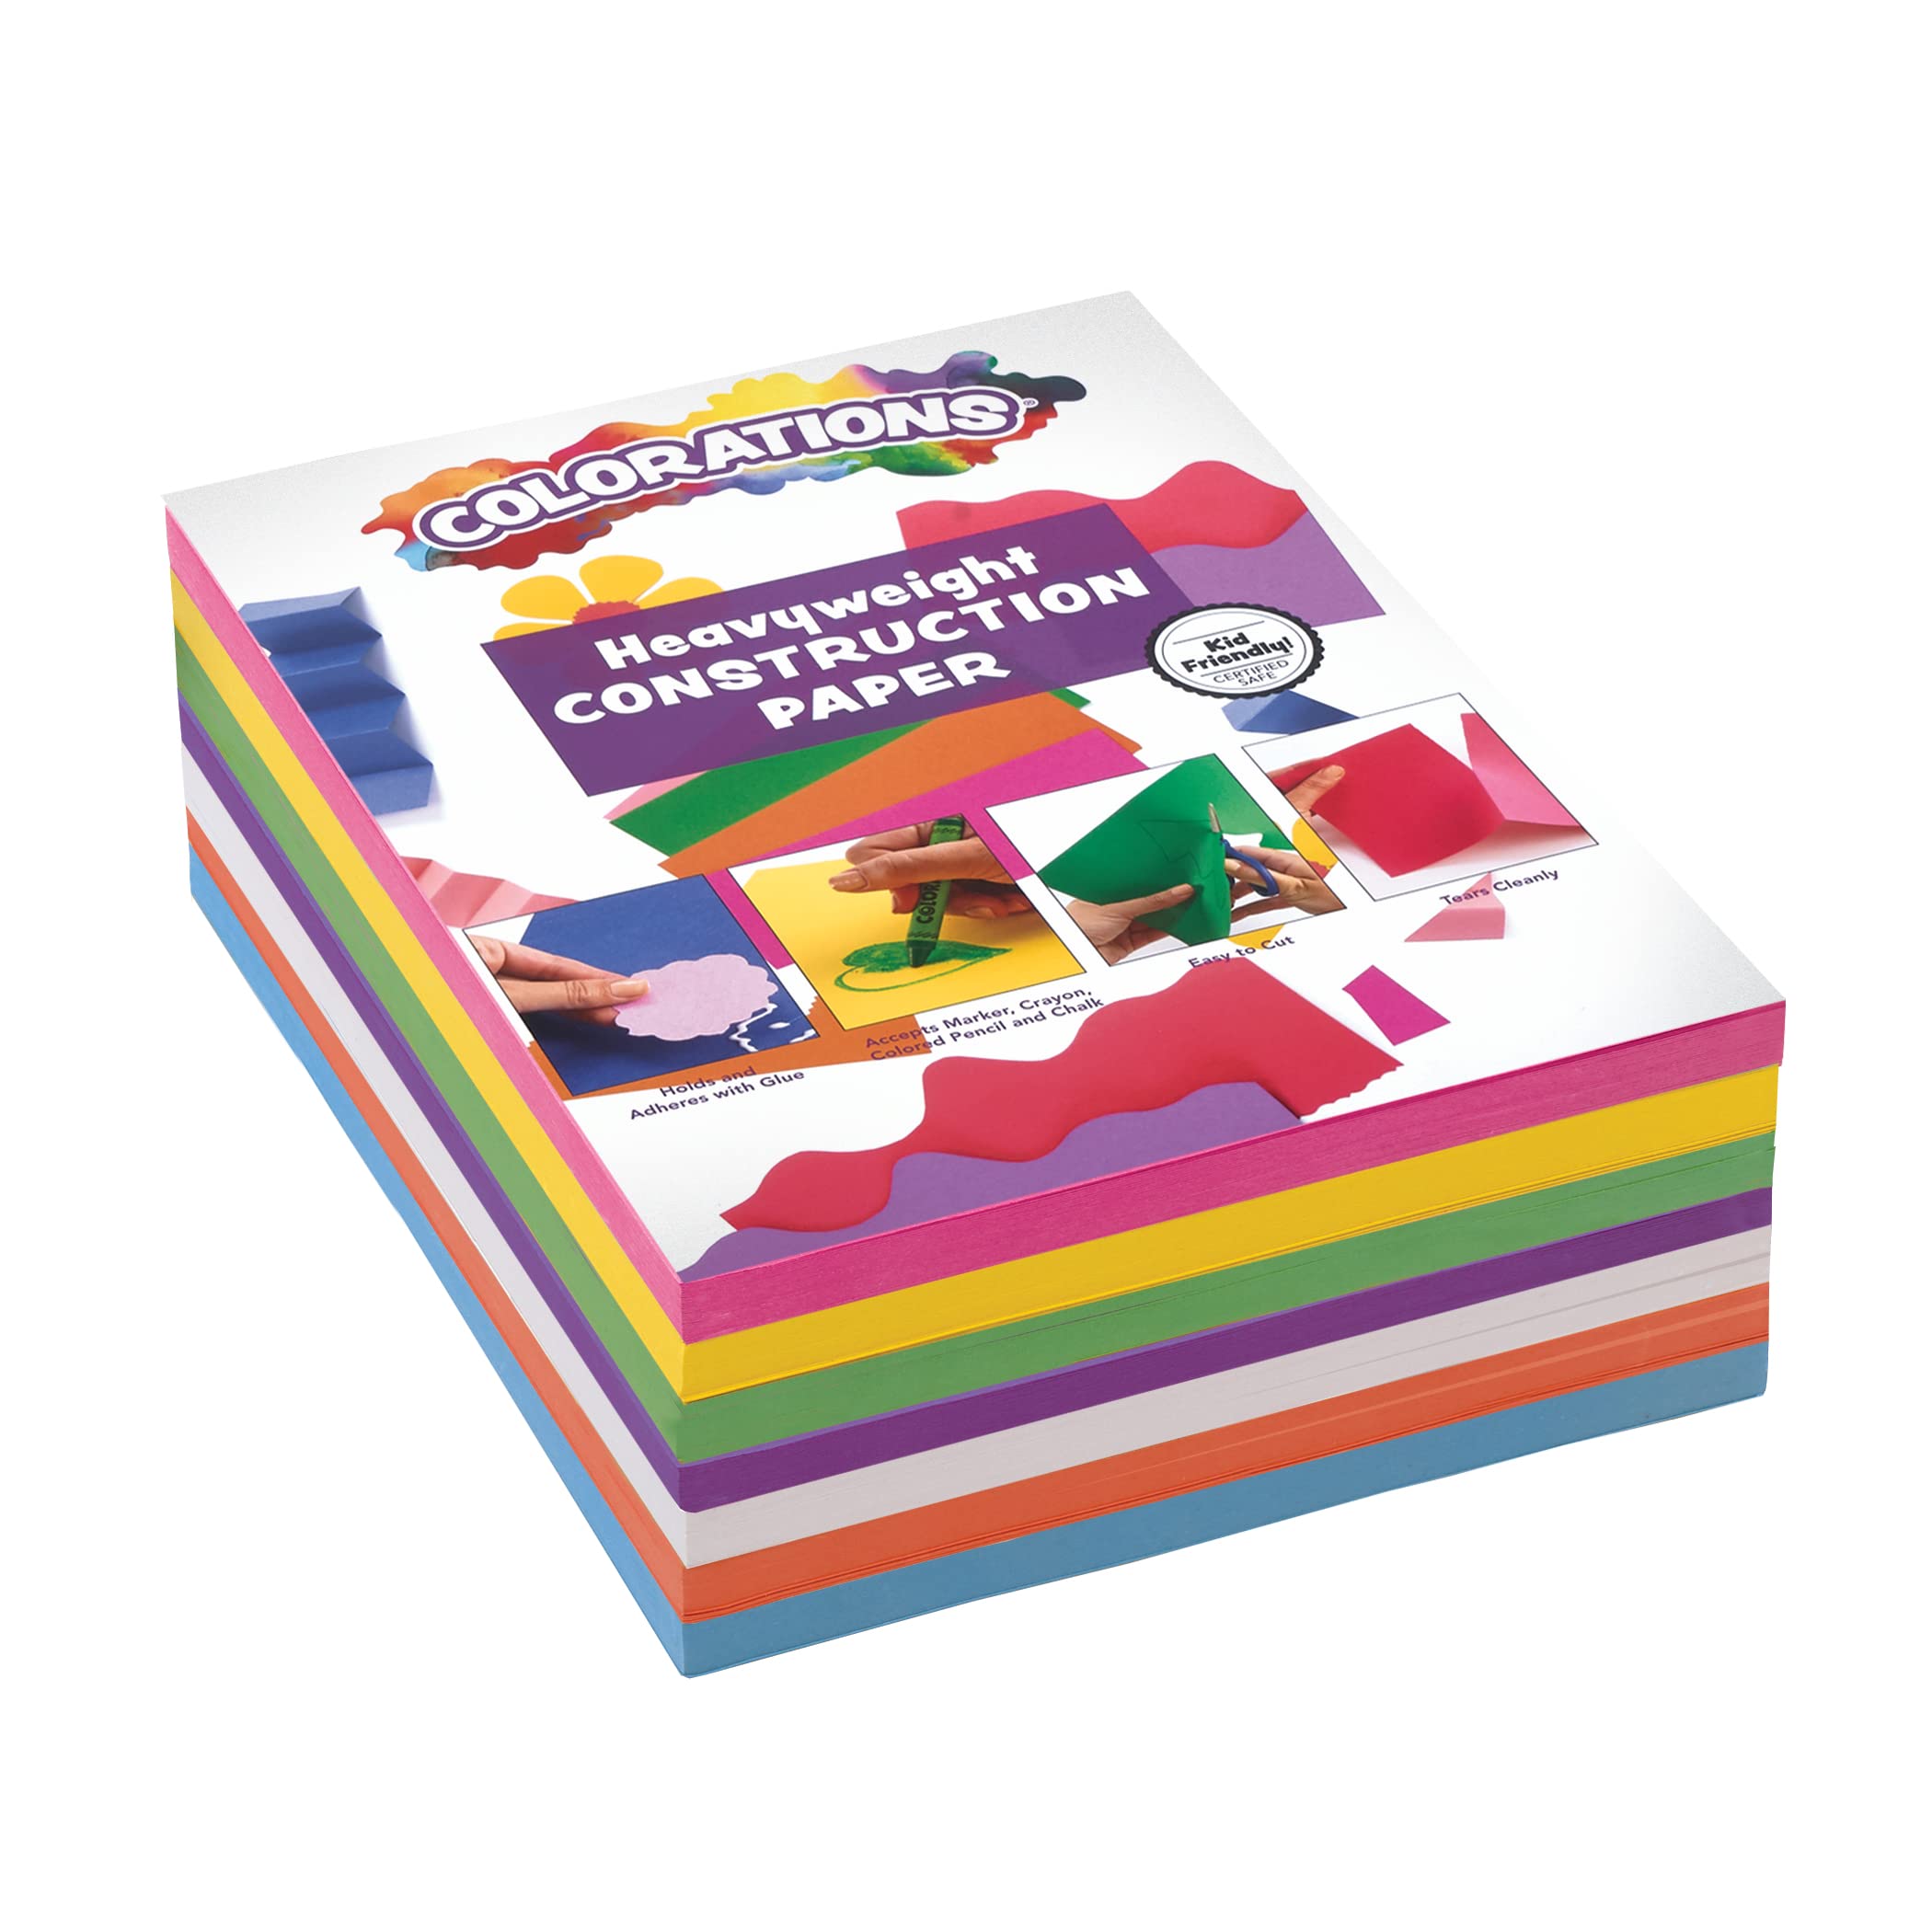 Colorations Construction Paper for Kids  7 Colors - 600 Bulk Sheets of  9X12 - Assorted Pack of Heavy Duty Craft Paper